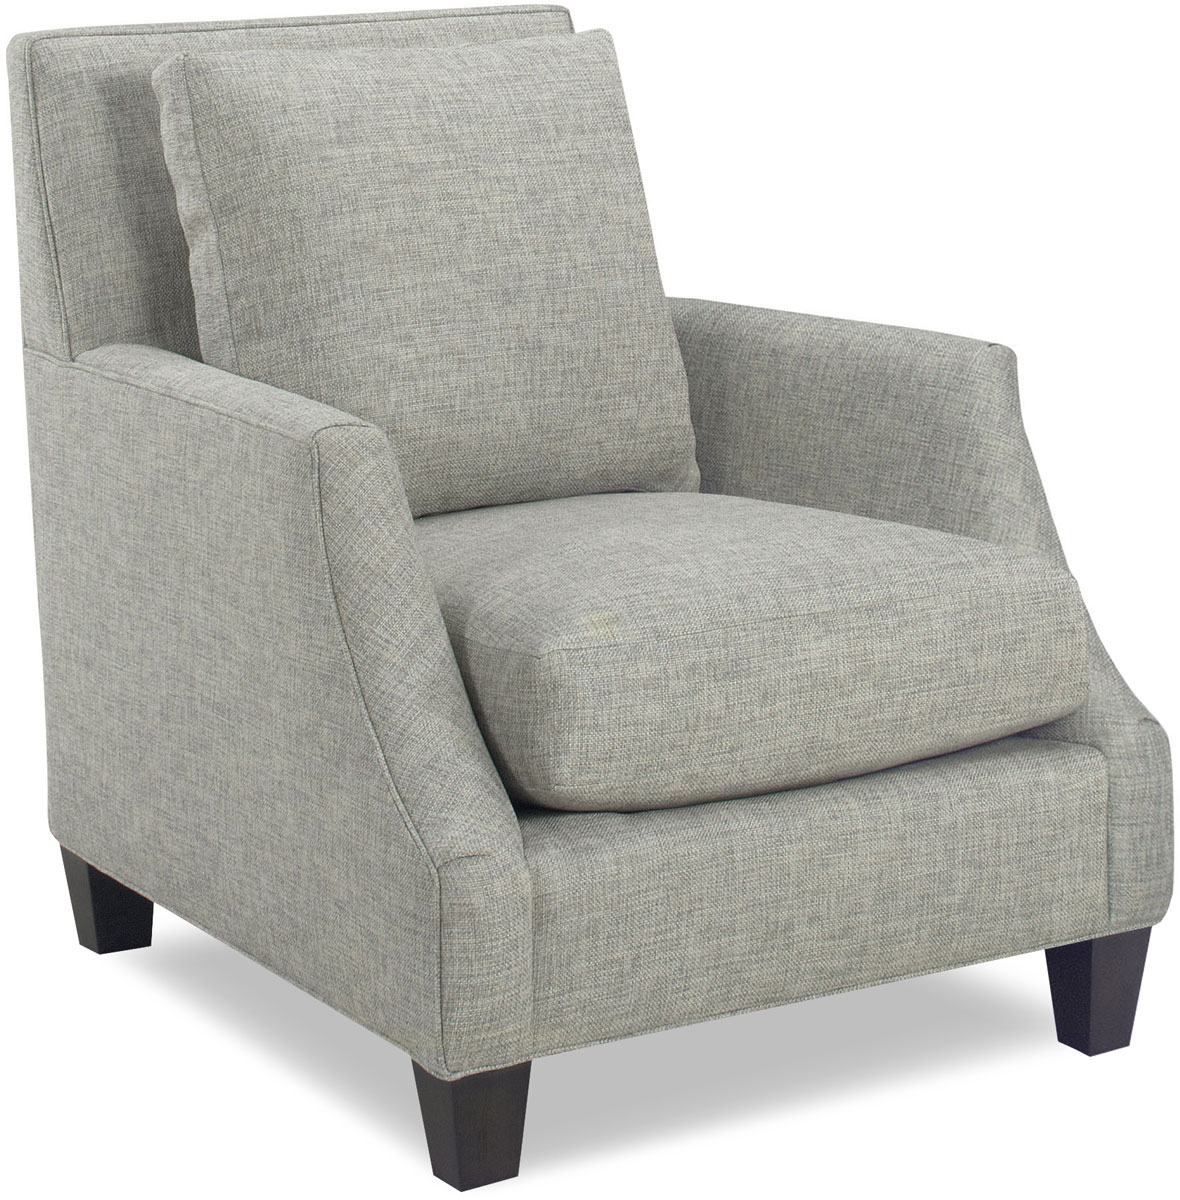 Temple Furniture 3815 Cadence Chair 